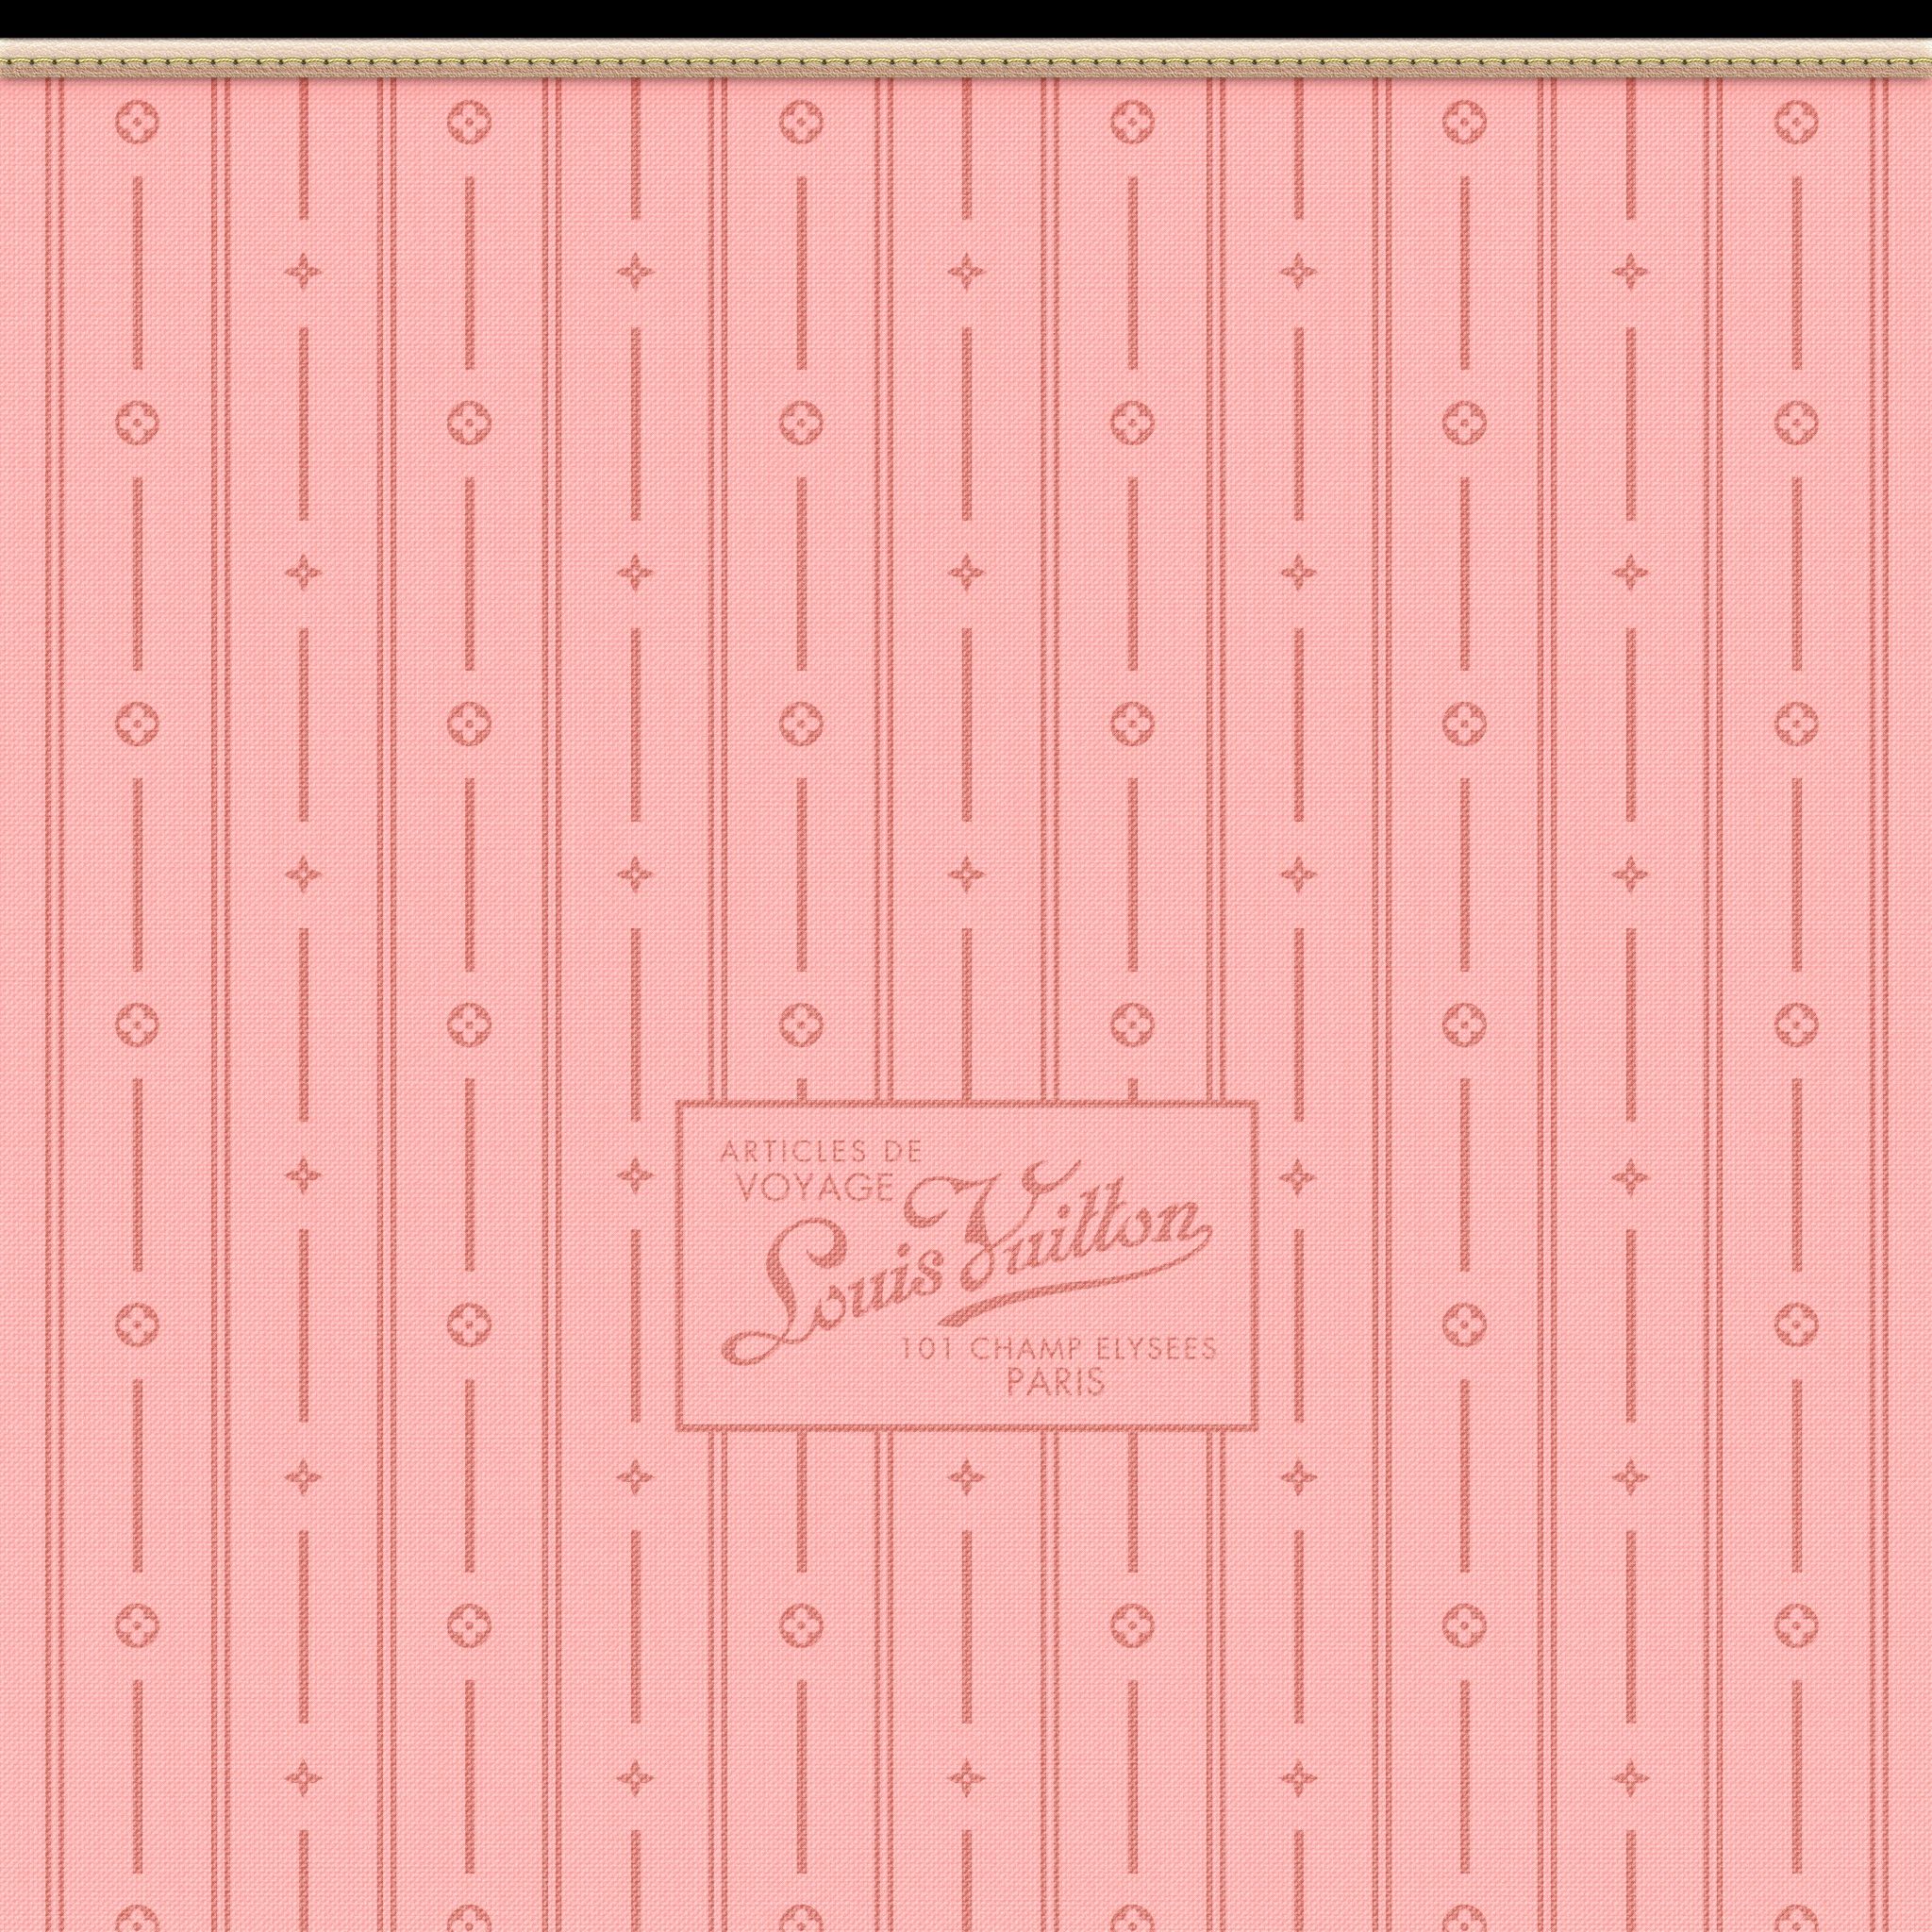 Dripping Louis Vuitton Live Wallpaper with Pink Background - free